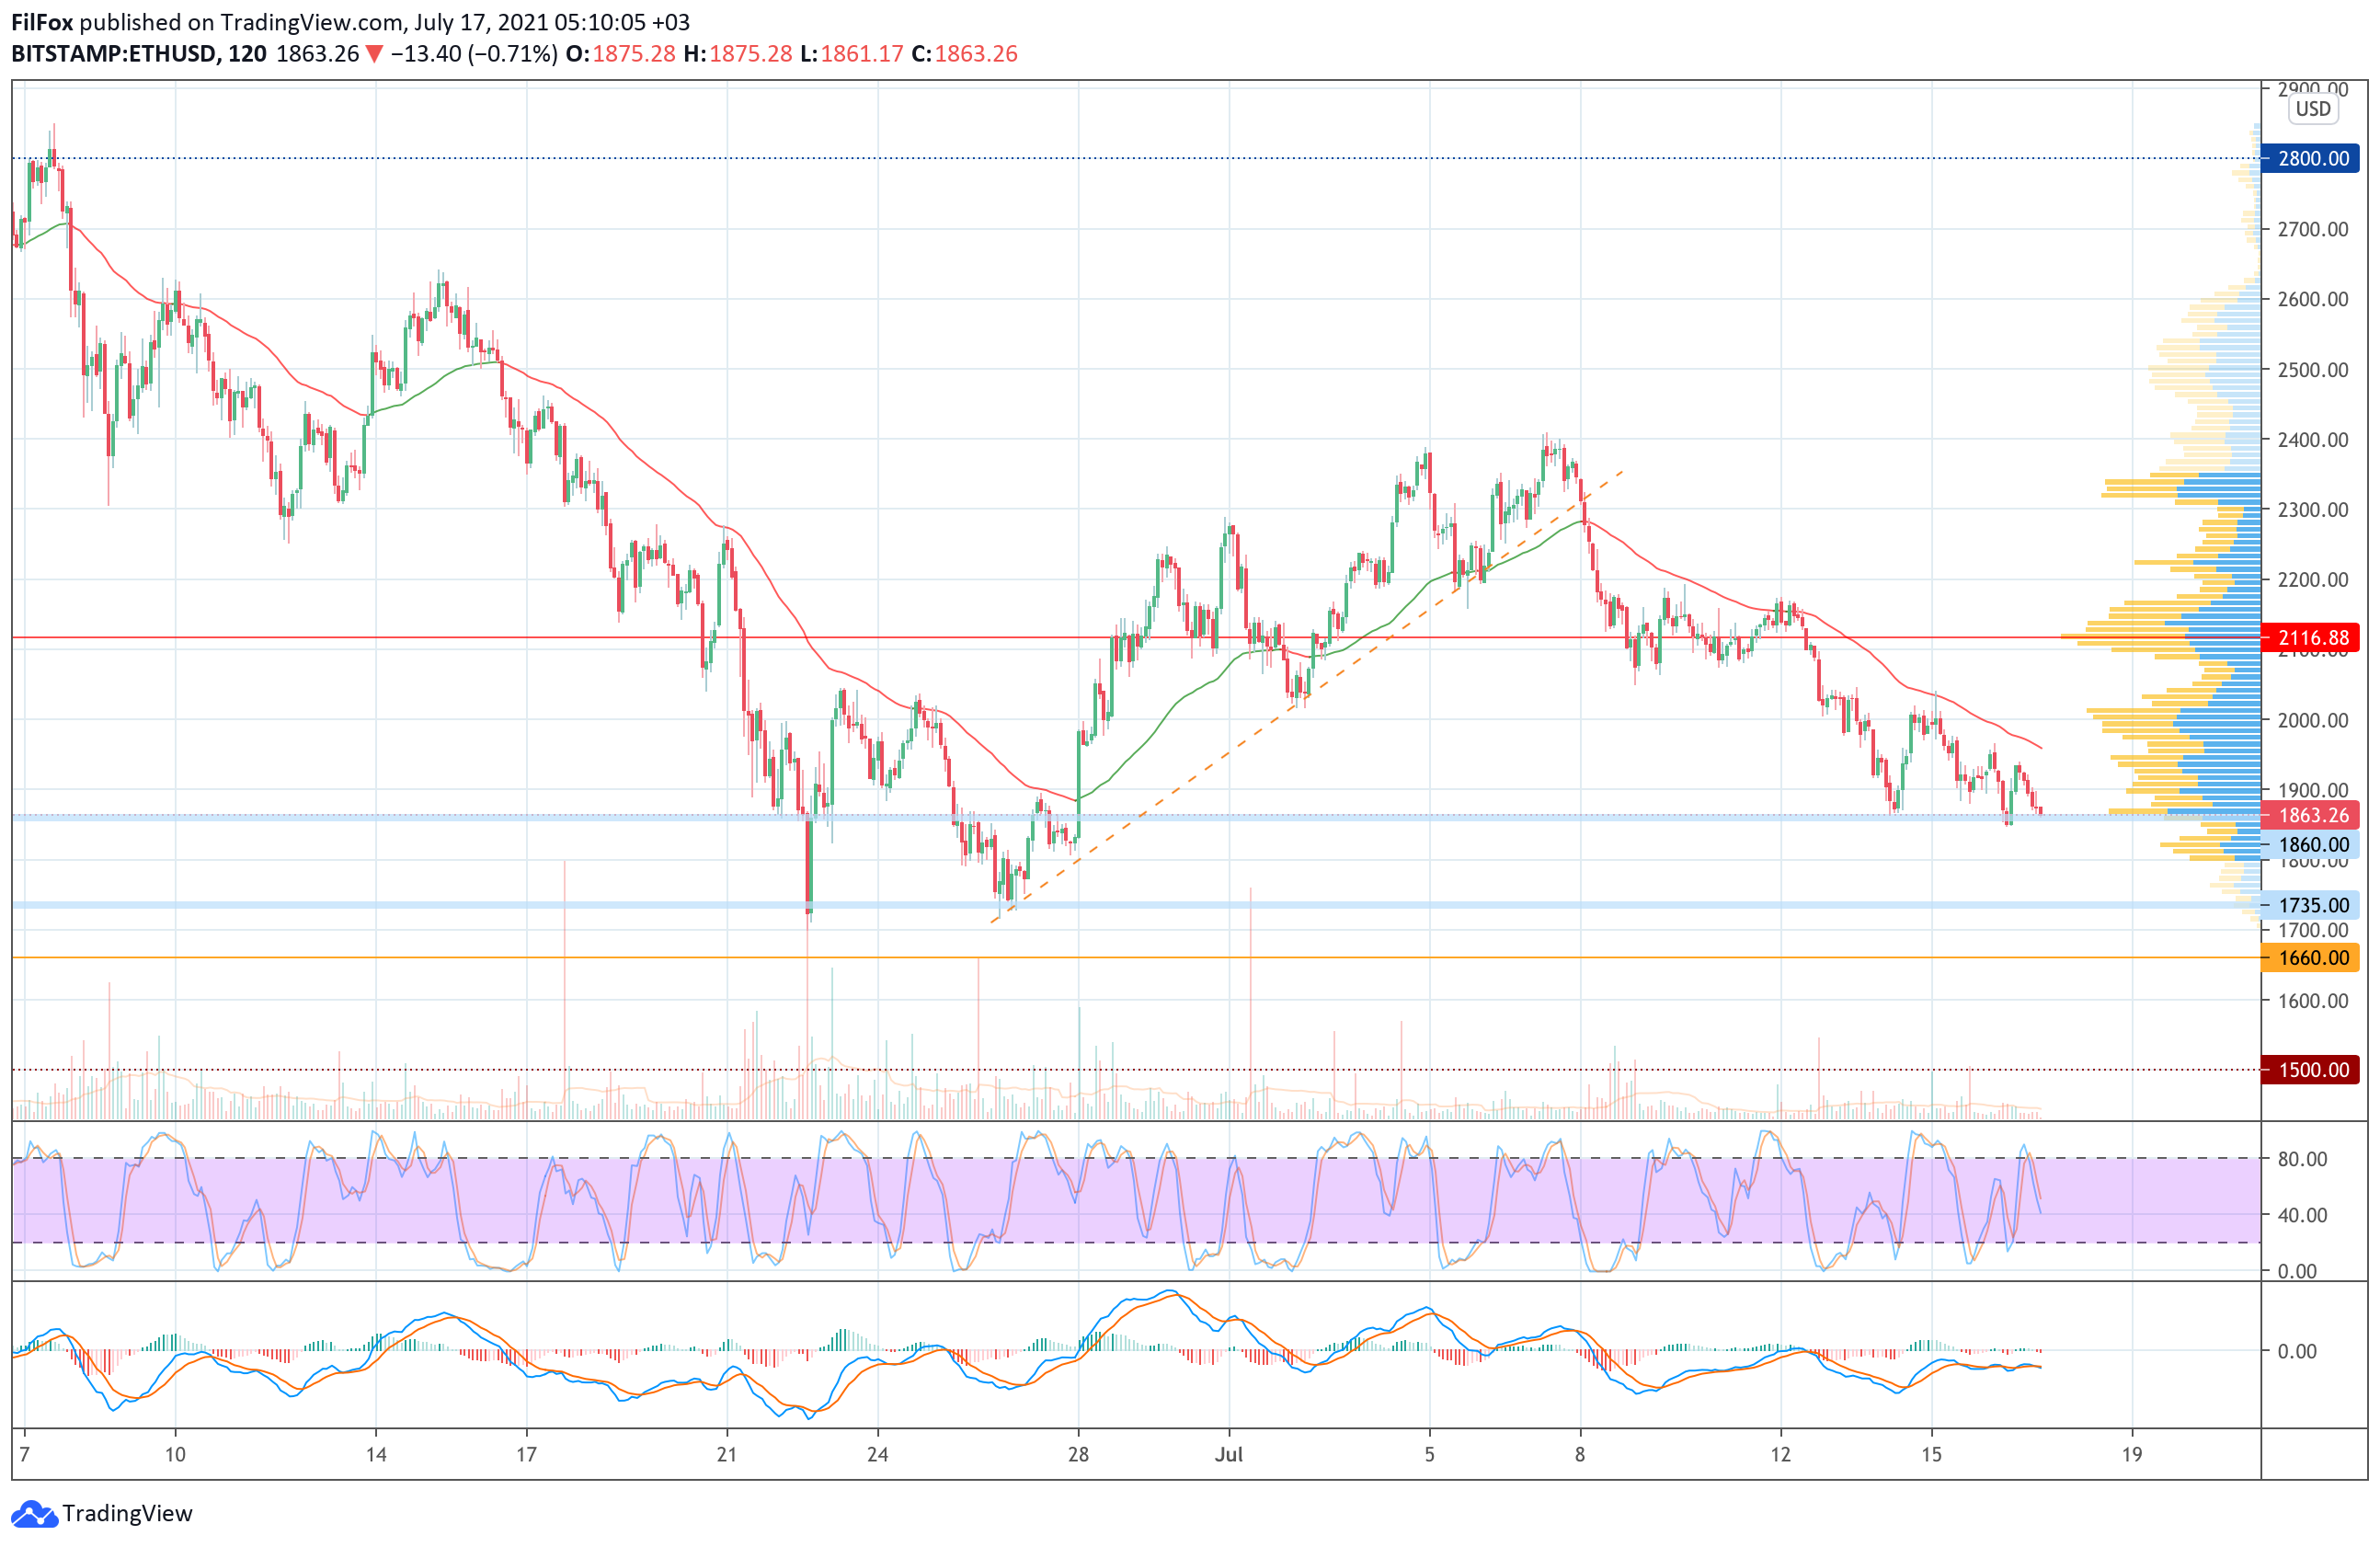 Analysis of the prices of Bitcoin, Ethereum, XRP for 07/17/2021